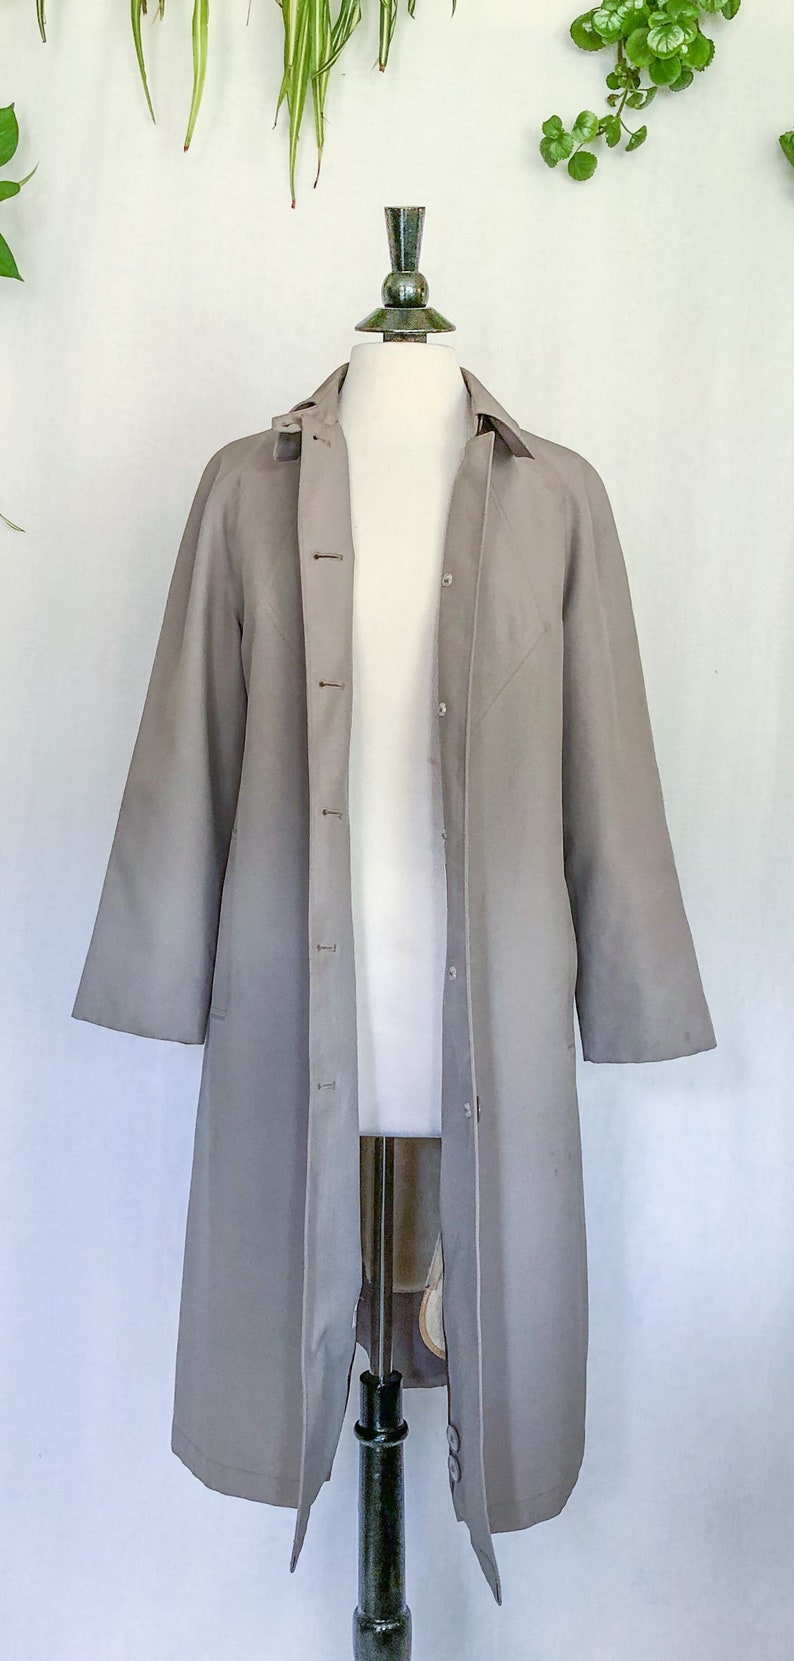 VTG 1970s Womens Misty Harbor Coat / Petite Size 8 / Vintage Union Made Misty Harbor / Taupe Rain Coat Zip Out Sherpa Liner / All Seasons image 3